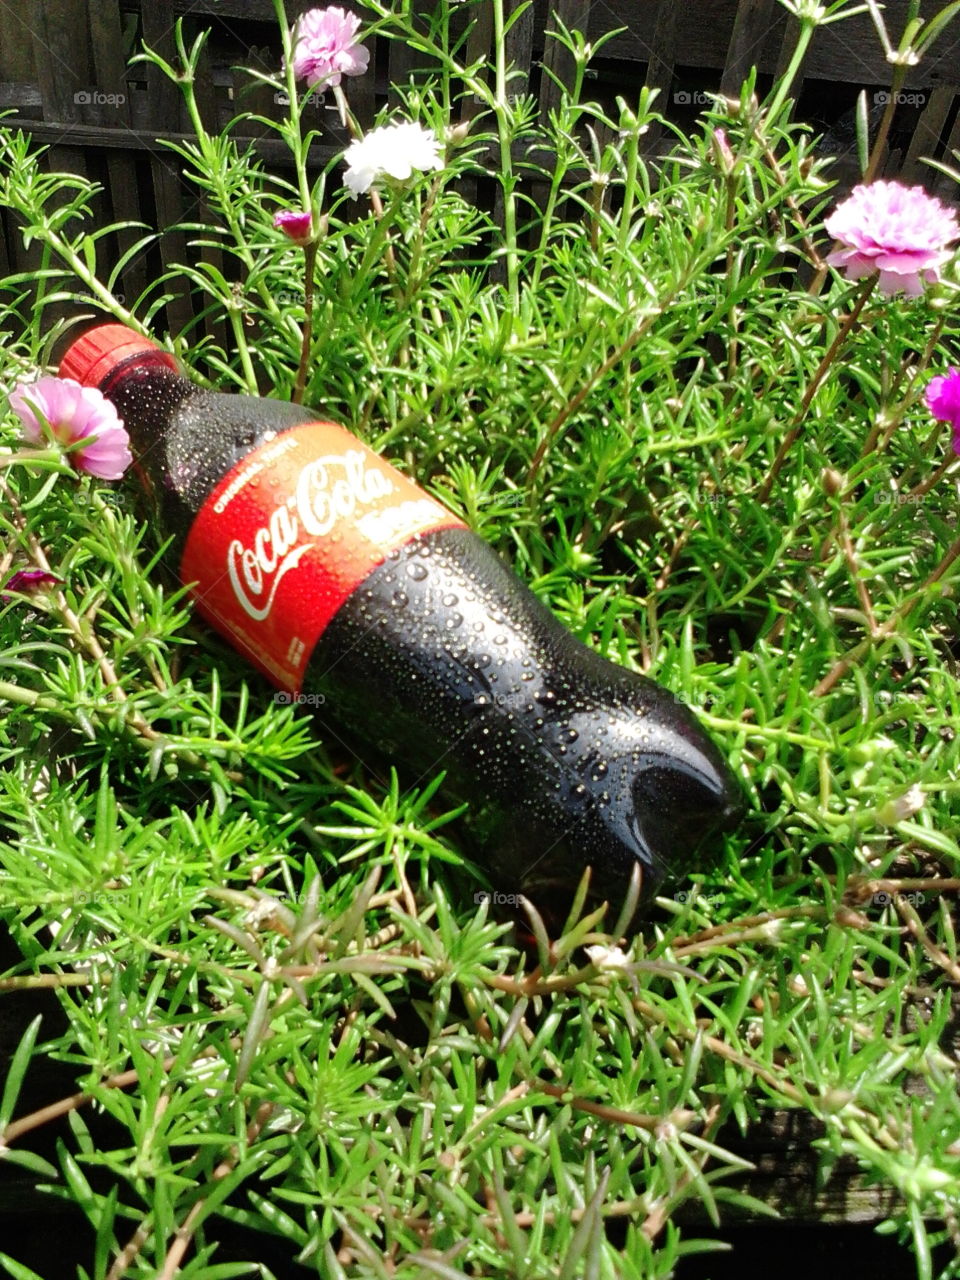 coca cola laying on the grass